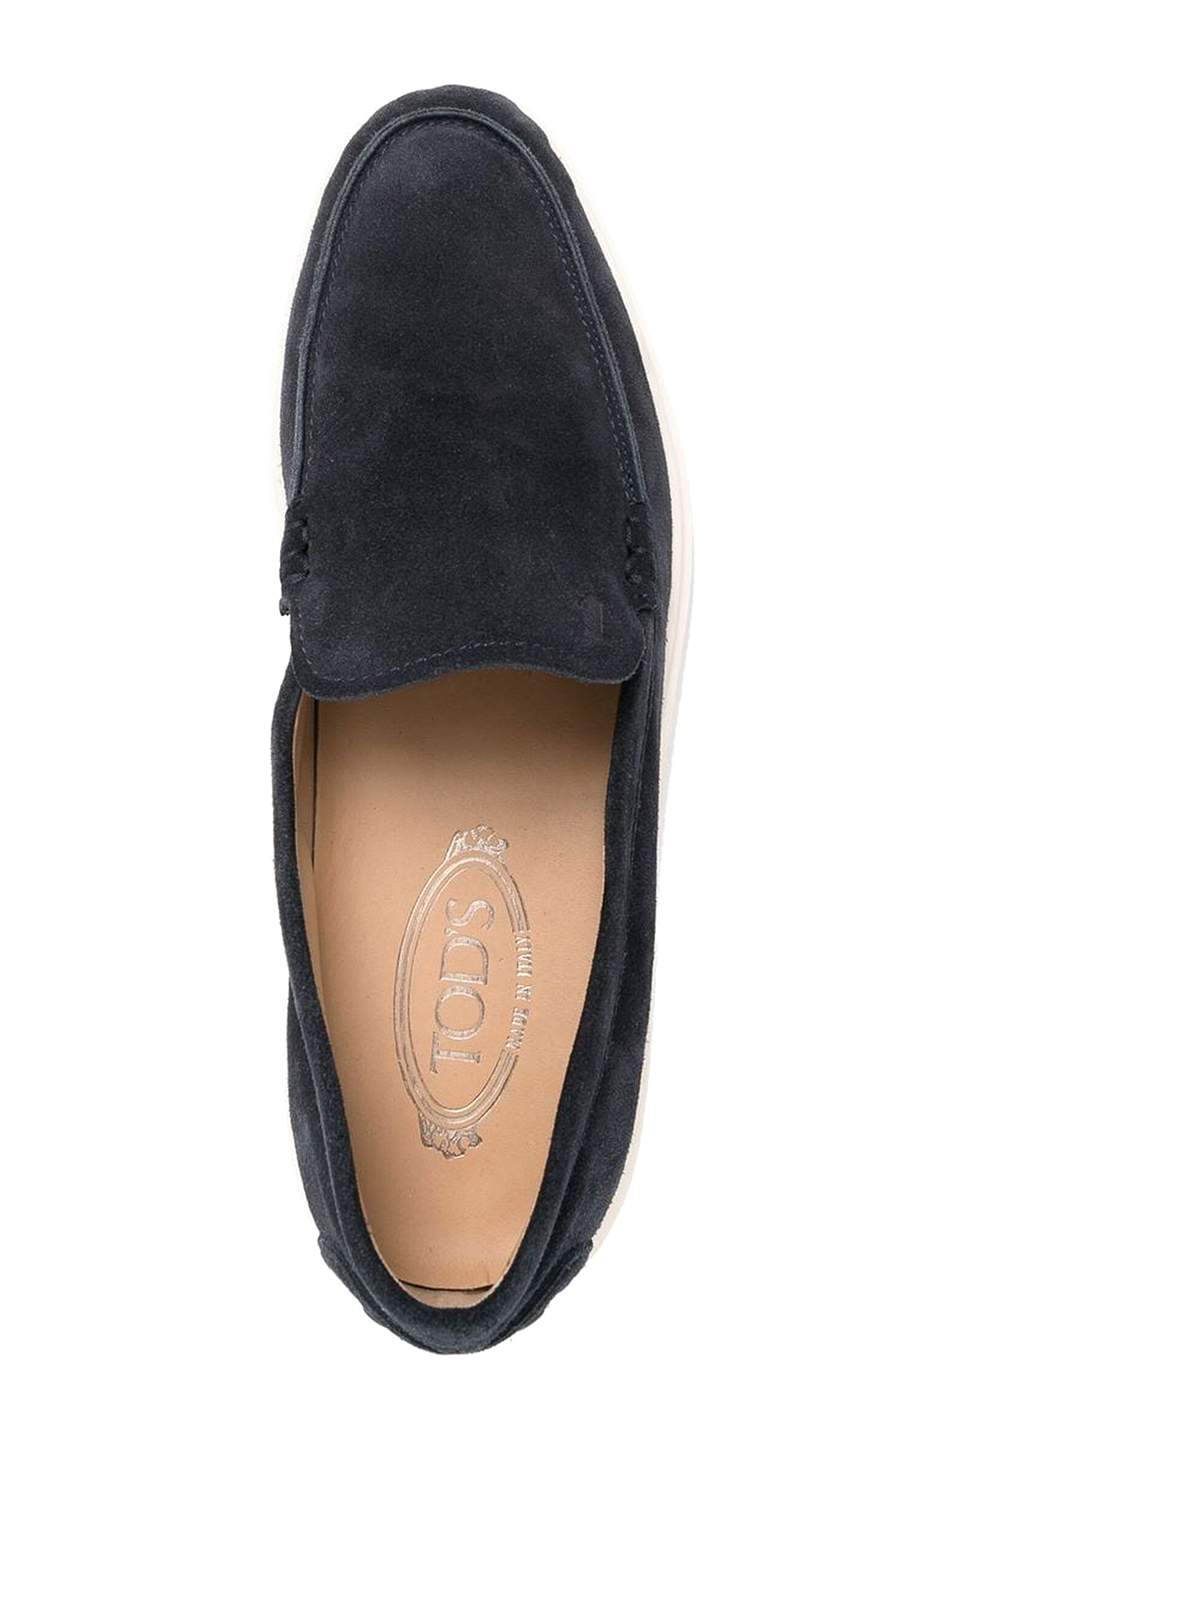 TOD'S Shearling-Lined Suede Slippers for Men | MR PORTER